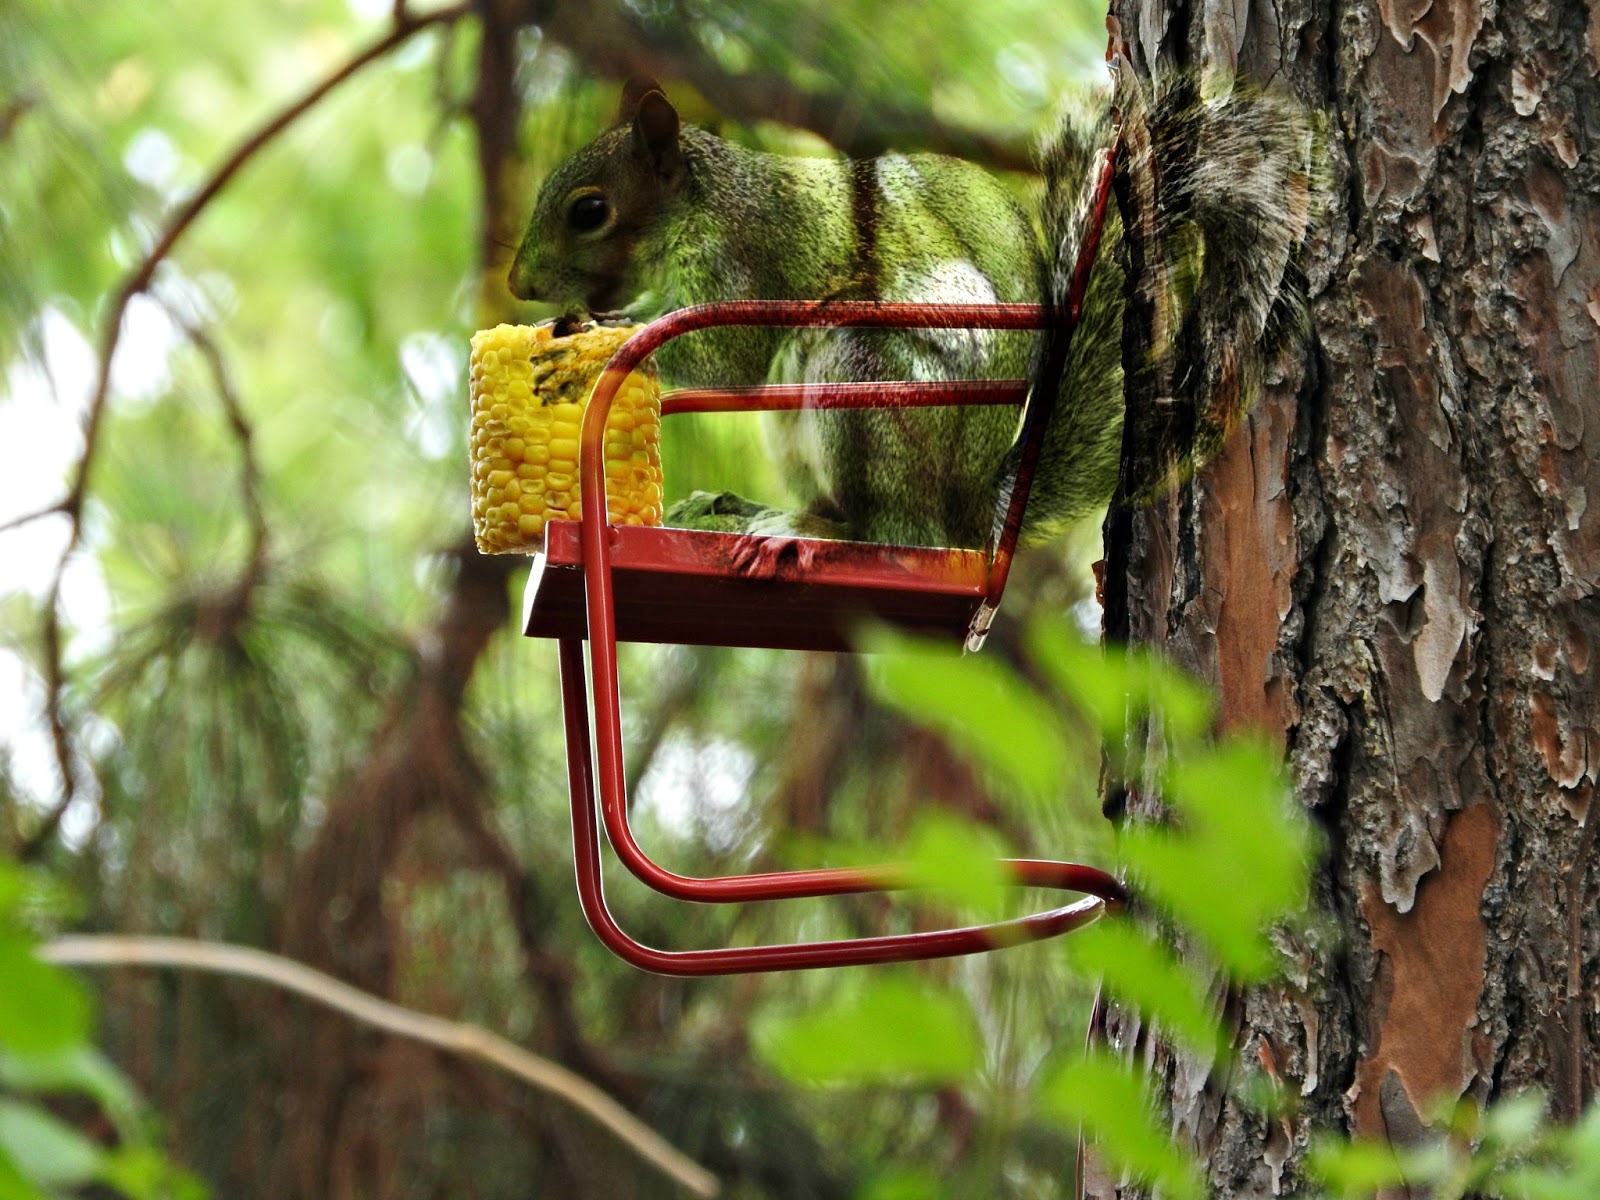 Mad Snapper: Lawn Chairs for Squirrels???